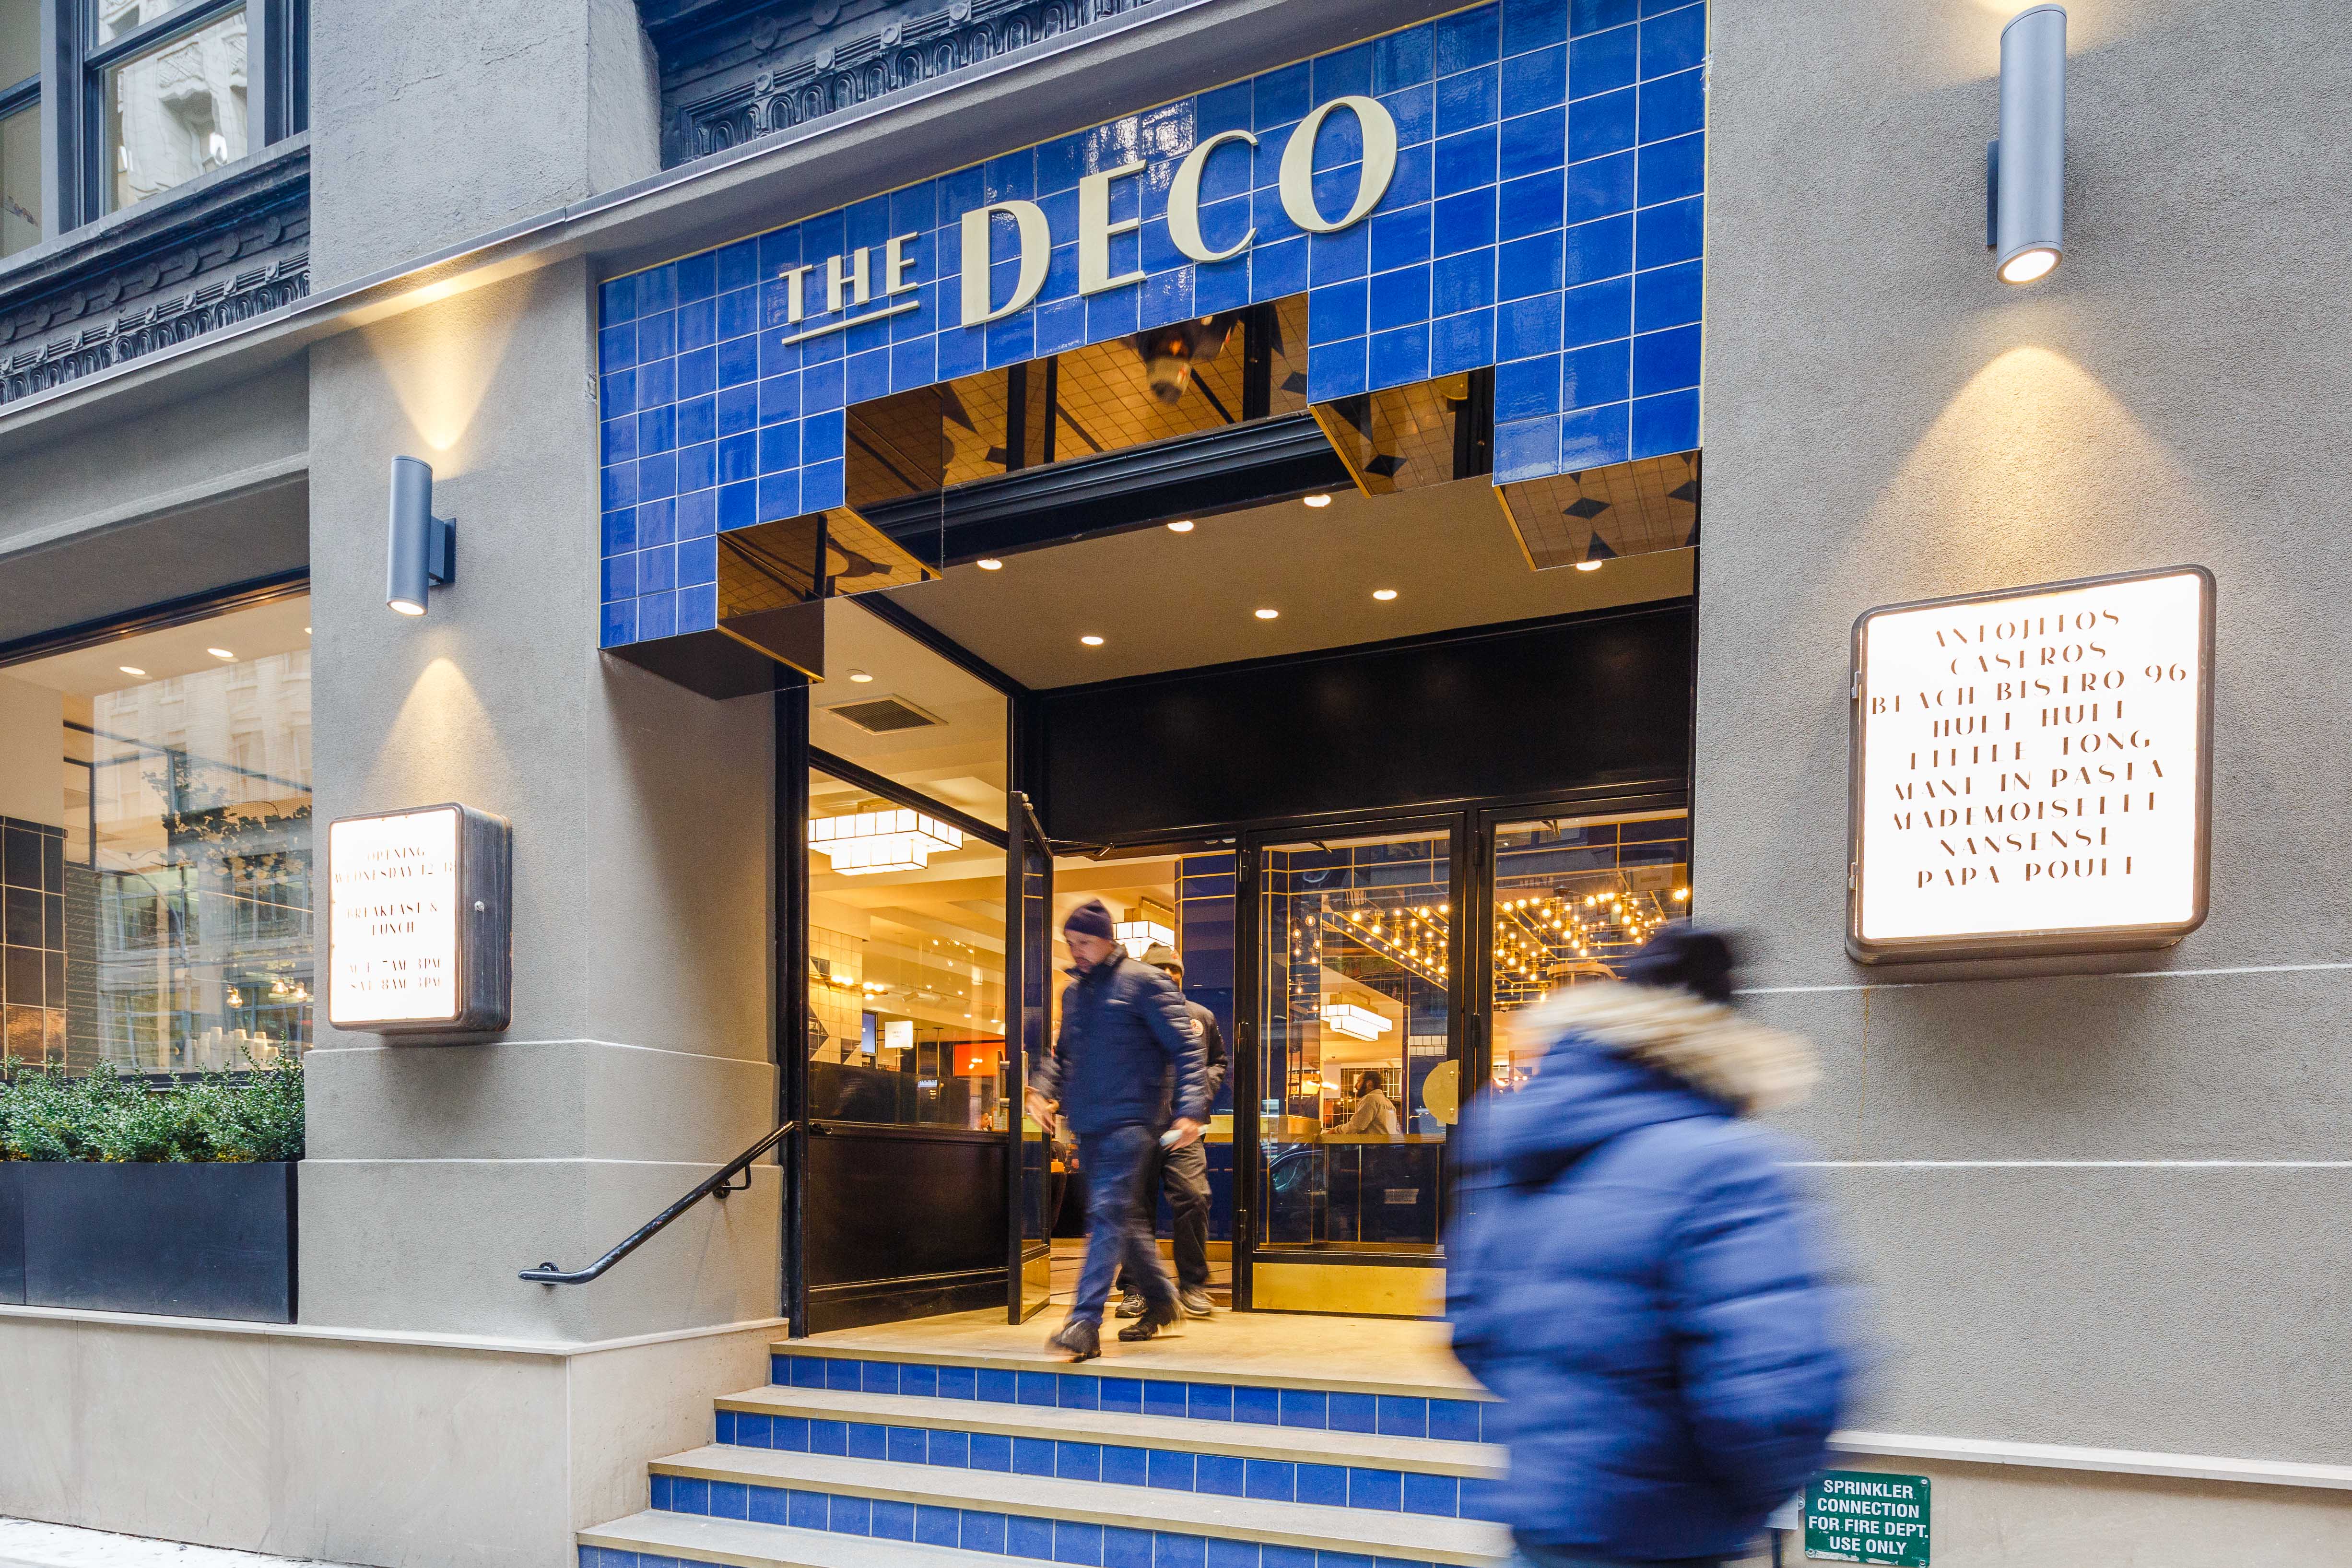 The blue-tiled storefront of the Deco with a sign up top